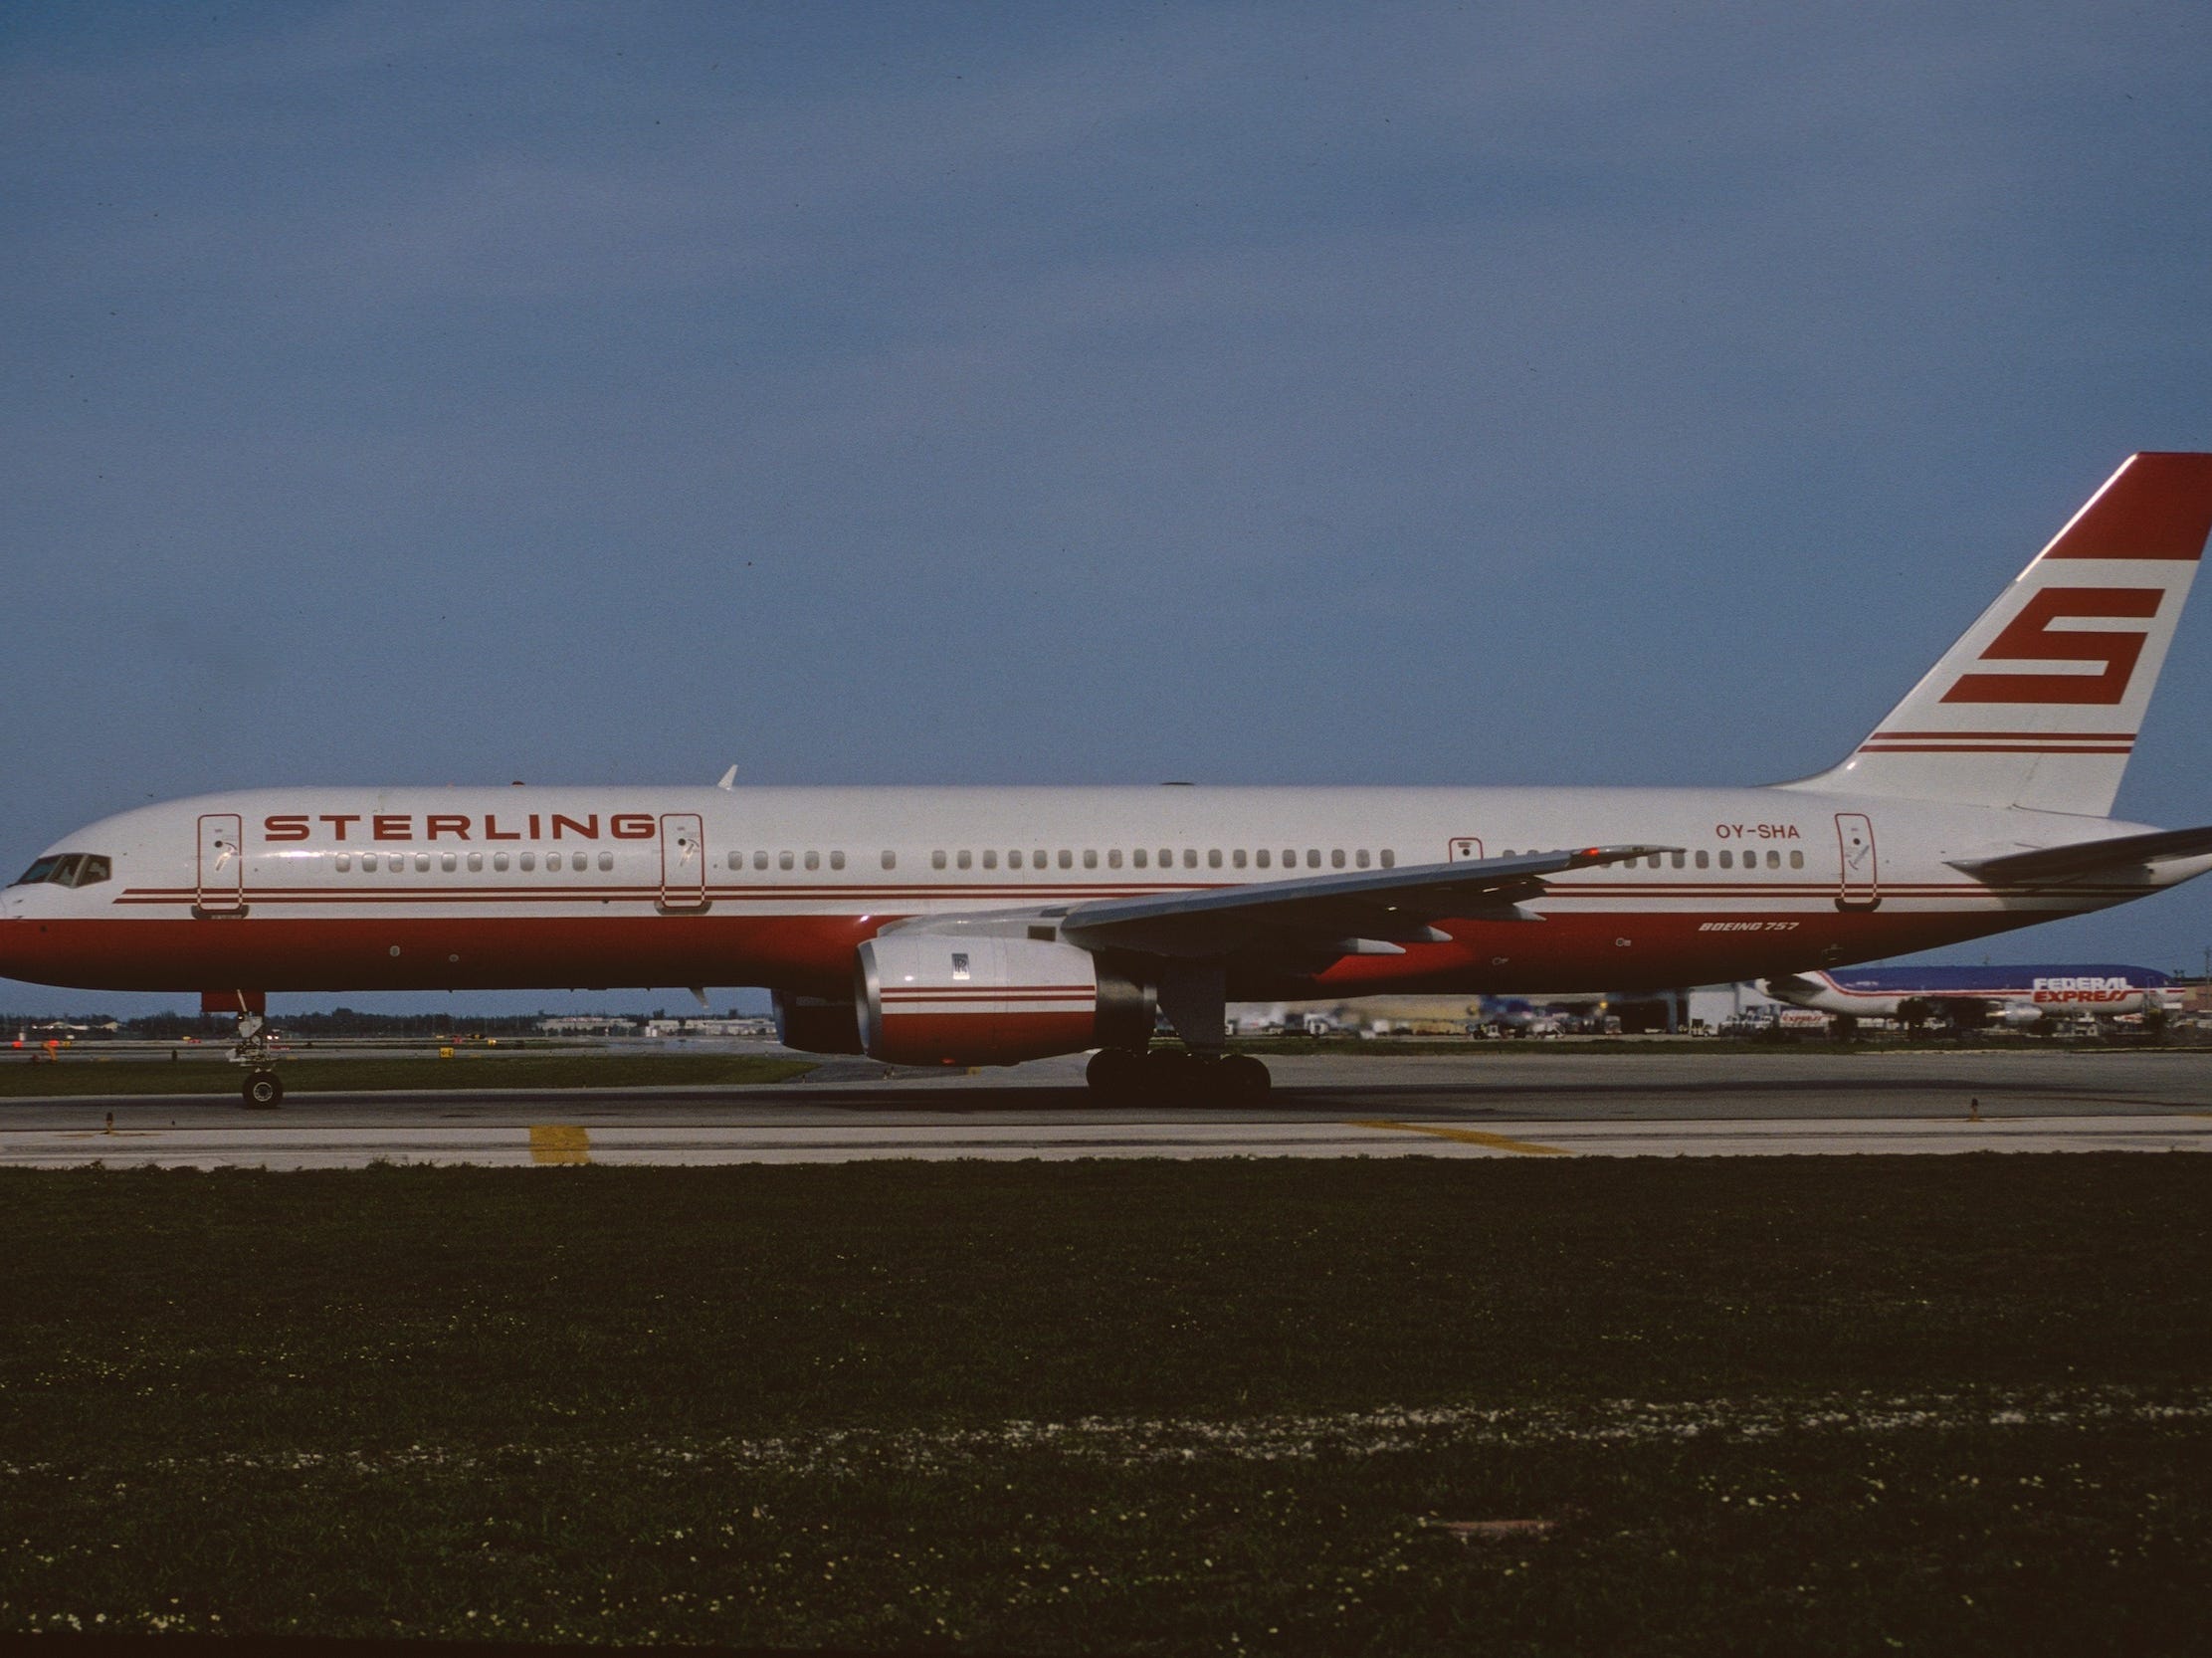 Trump&#39;s 757 when it flew for Sterling Airlines.